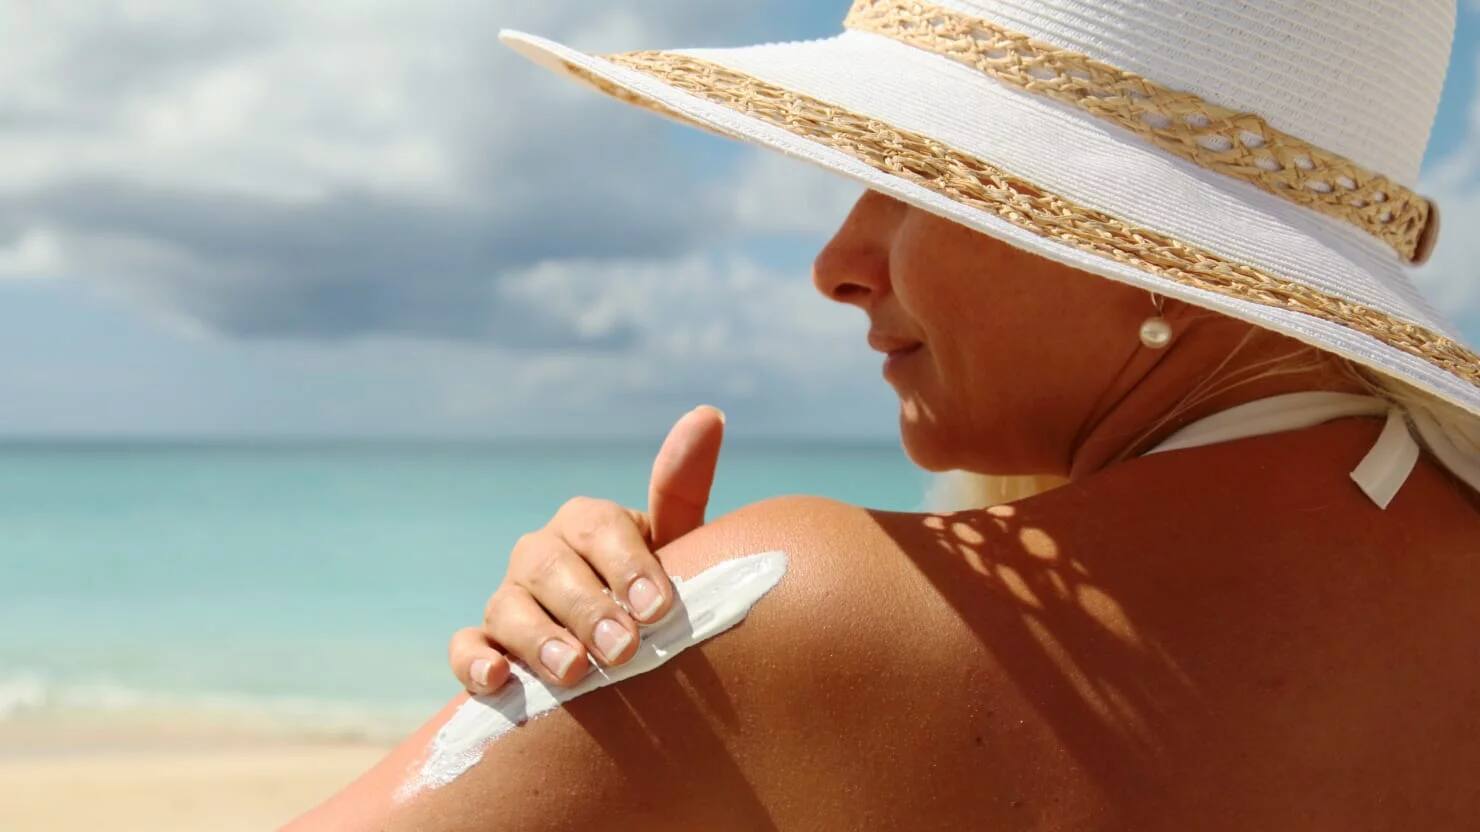 does sunscreen use and skin care has any relation